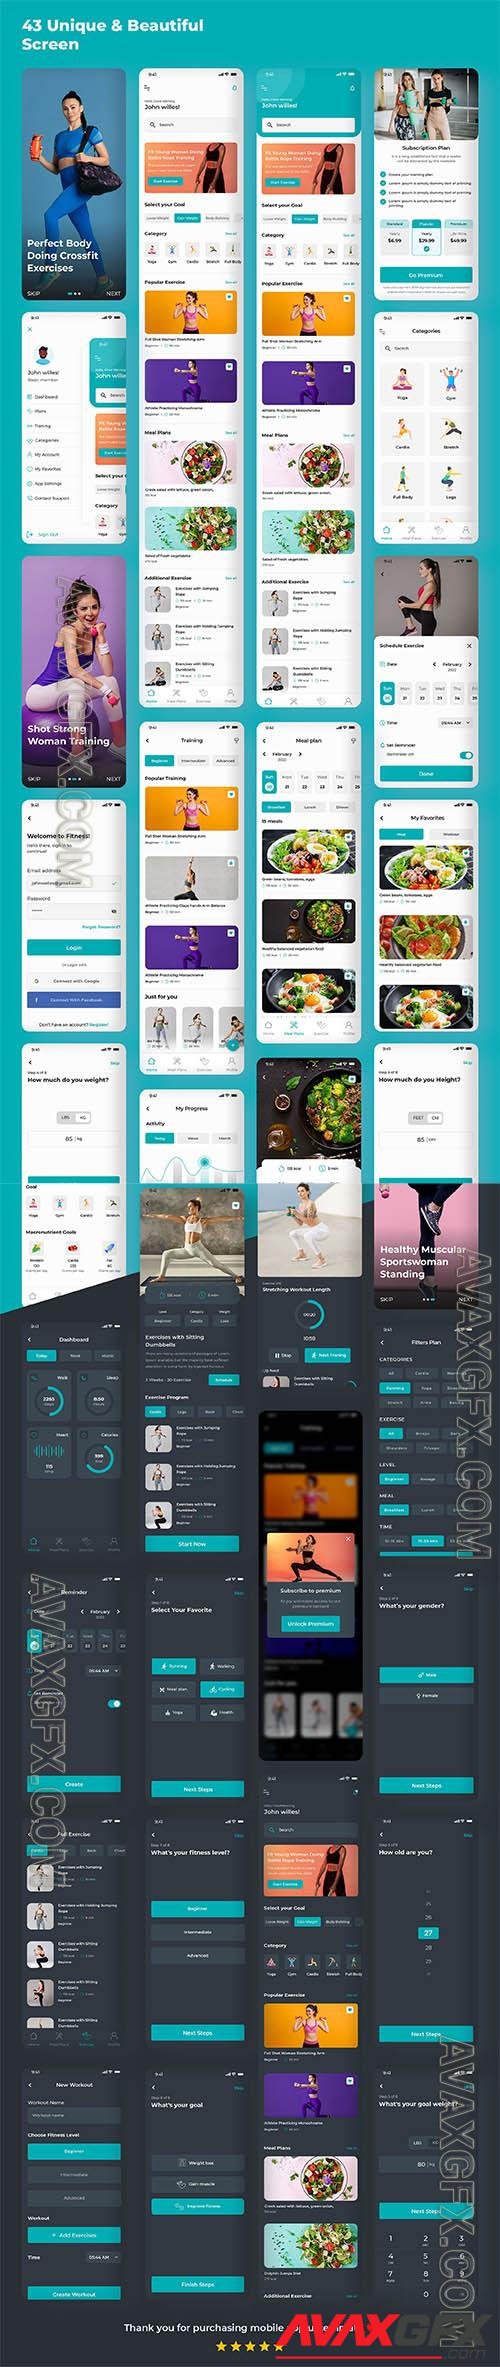 FitMeal - Workouts & Meal Planner | Fitness Mobile UI Kit